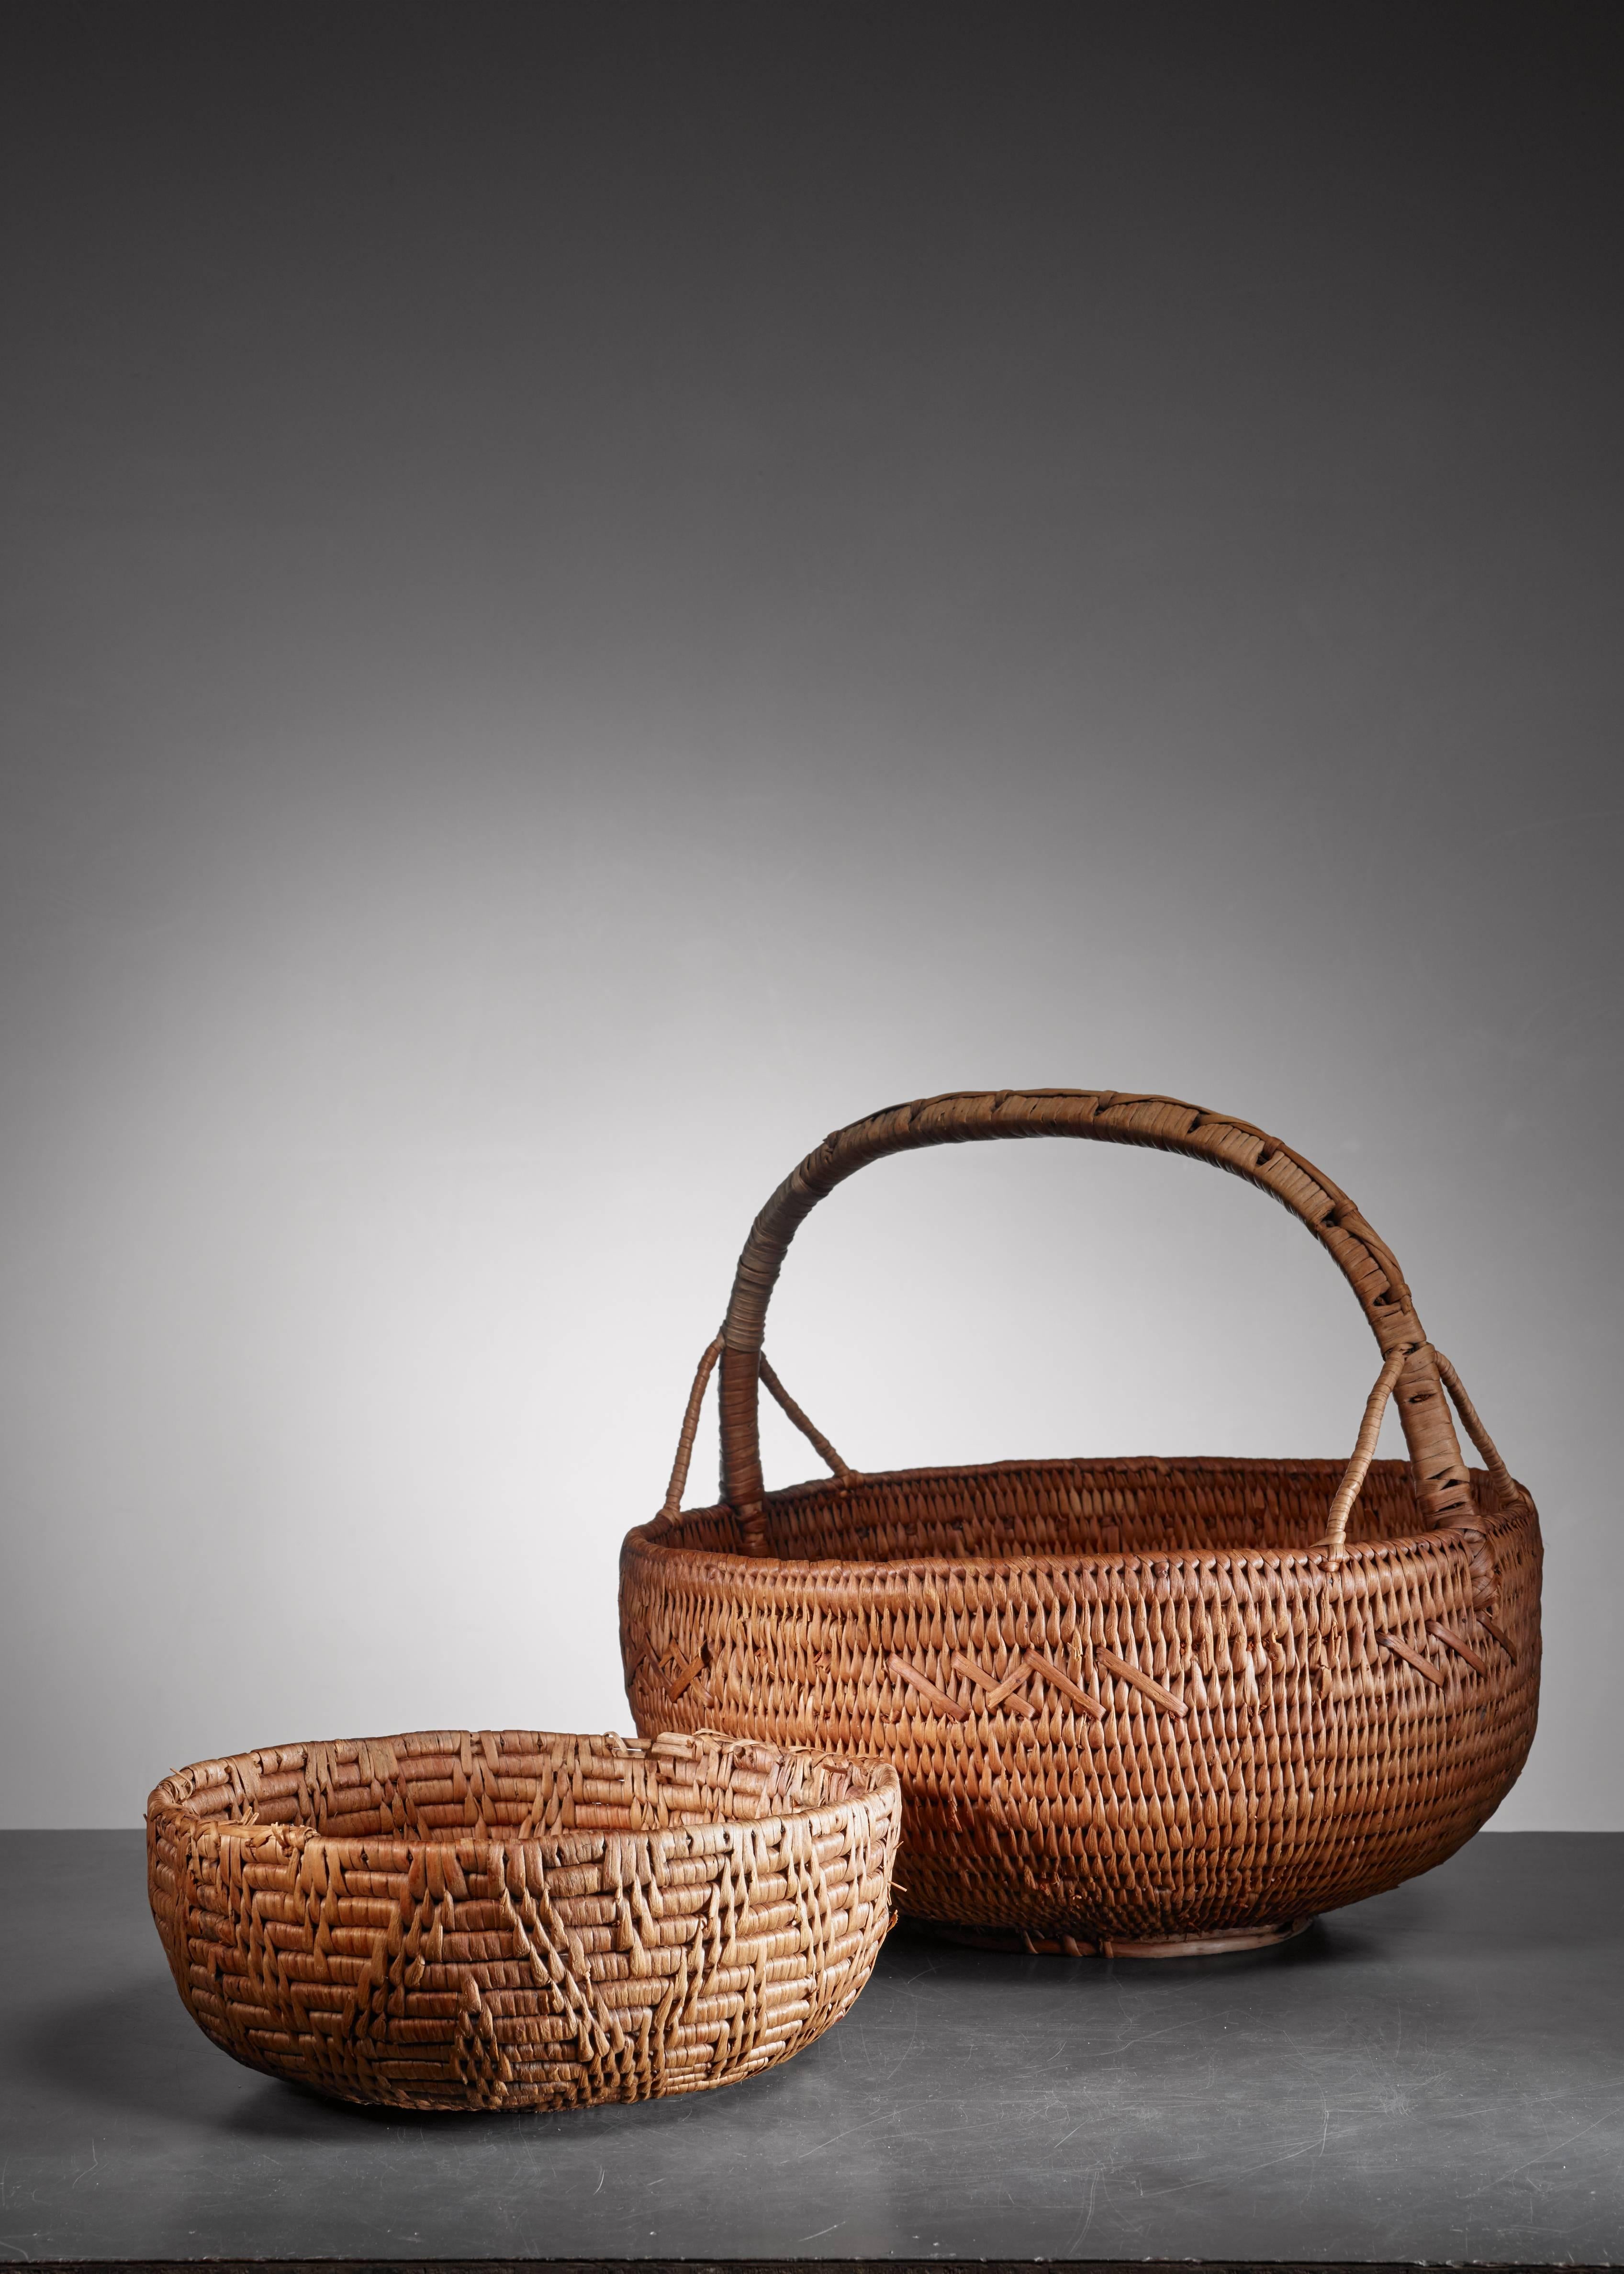 A pair of Swedish Folk Art baskets, made of woven twigs and birch bark.

The measurements stated are of the largest basket with a handle. The smaller piece has a 31 cm diameter and is 12 cm high.
   